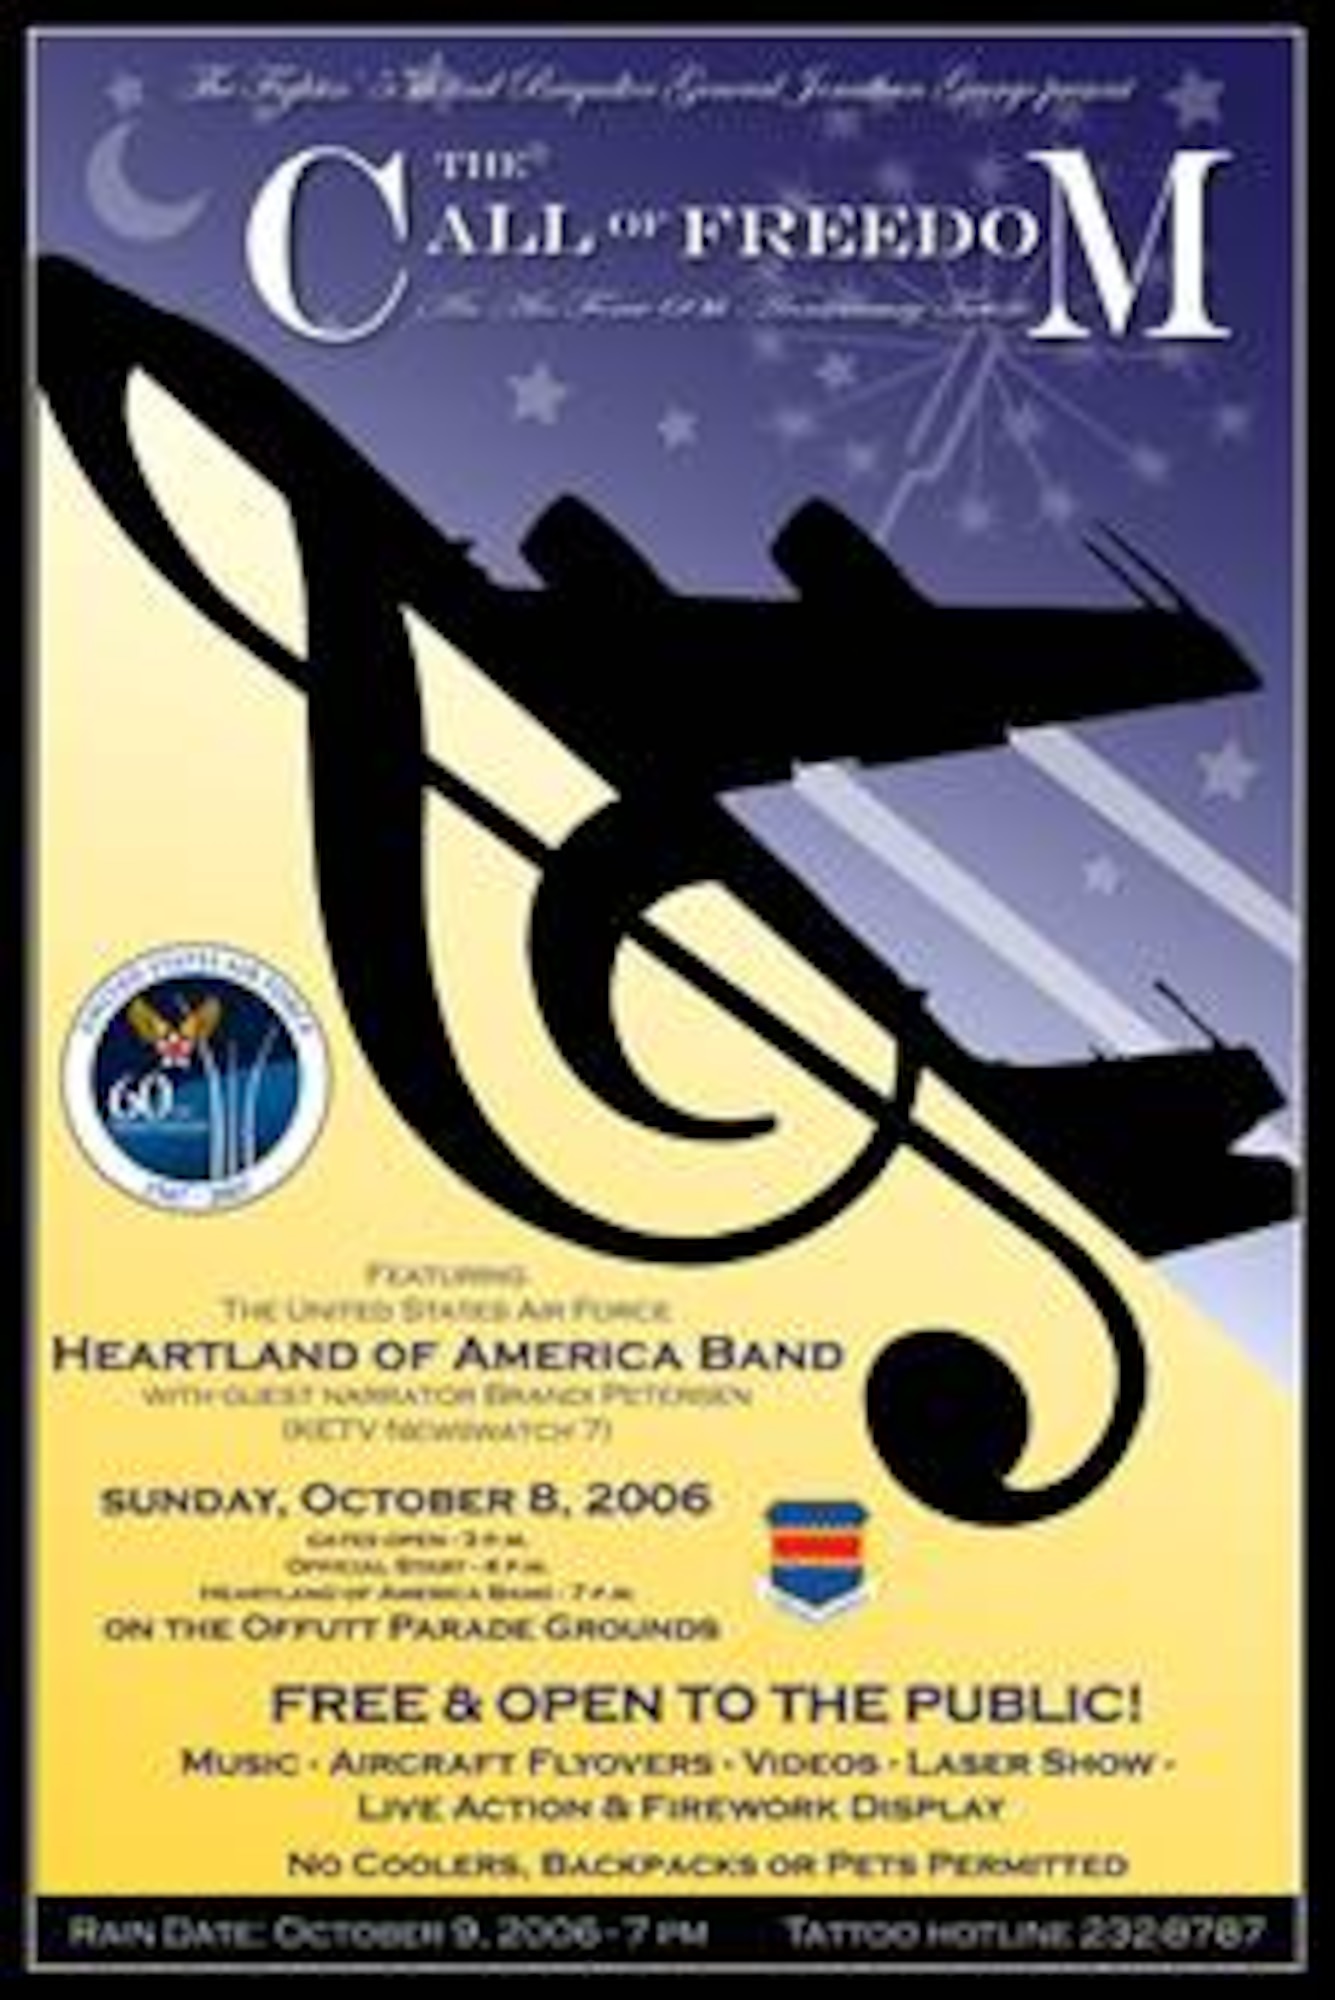 "The Call of Freedom," A Military Tattoo,  will offer spectators a unique blend of music, theater and the military experience featuring the United States Air Force's Heartland of America Band. Gates open at 3 p.m. Oct. 8 at the Offutt Parade Ground. The event is free and open to the public. Guests should enter the base through the SAC Gate (off Capehart Rd.) They will be directed to free parking. Shuttle busses will transport guests to the event. Guests should plan for security similiar to that of an airport. All vehicles and belongings will be subject to search. Guests can bring lawn chairs and blankets but should not to bring coolers, backpacks, weapons or pets. The rain date (if needed) is Oct. 9  (Graphic by Josh Plueger)




